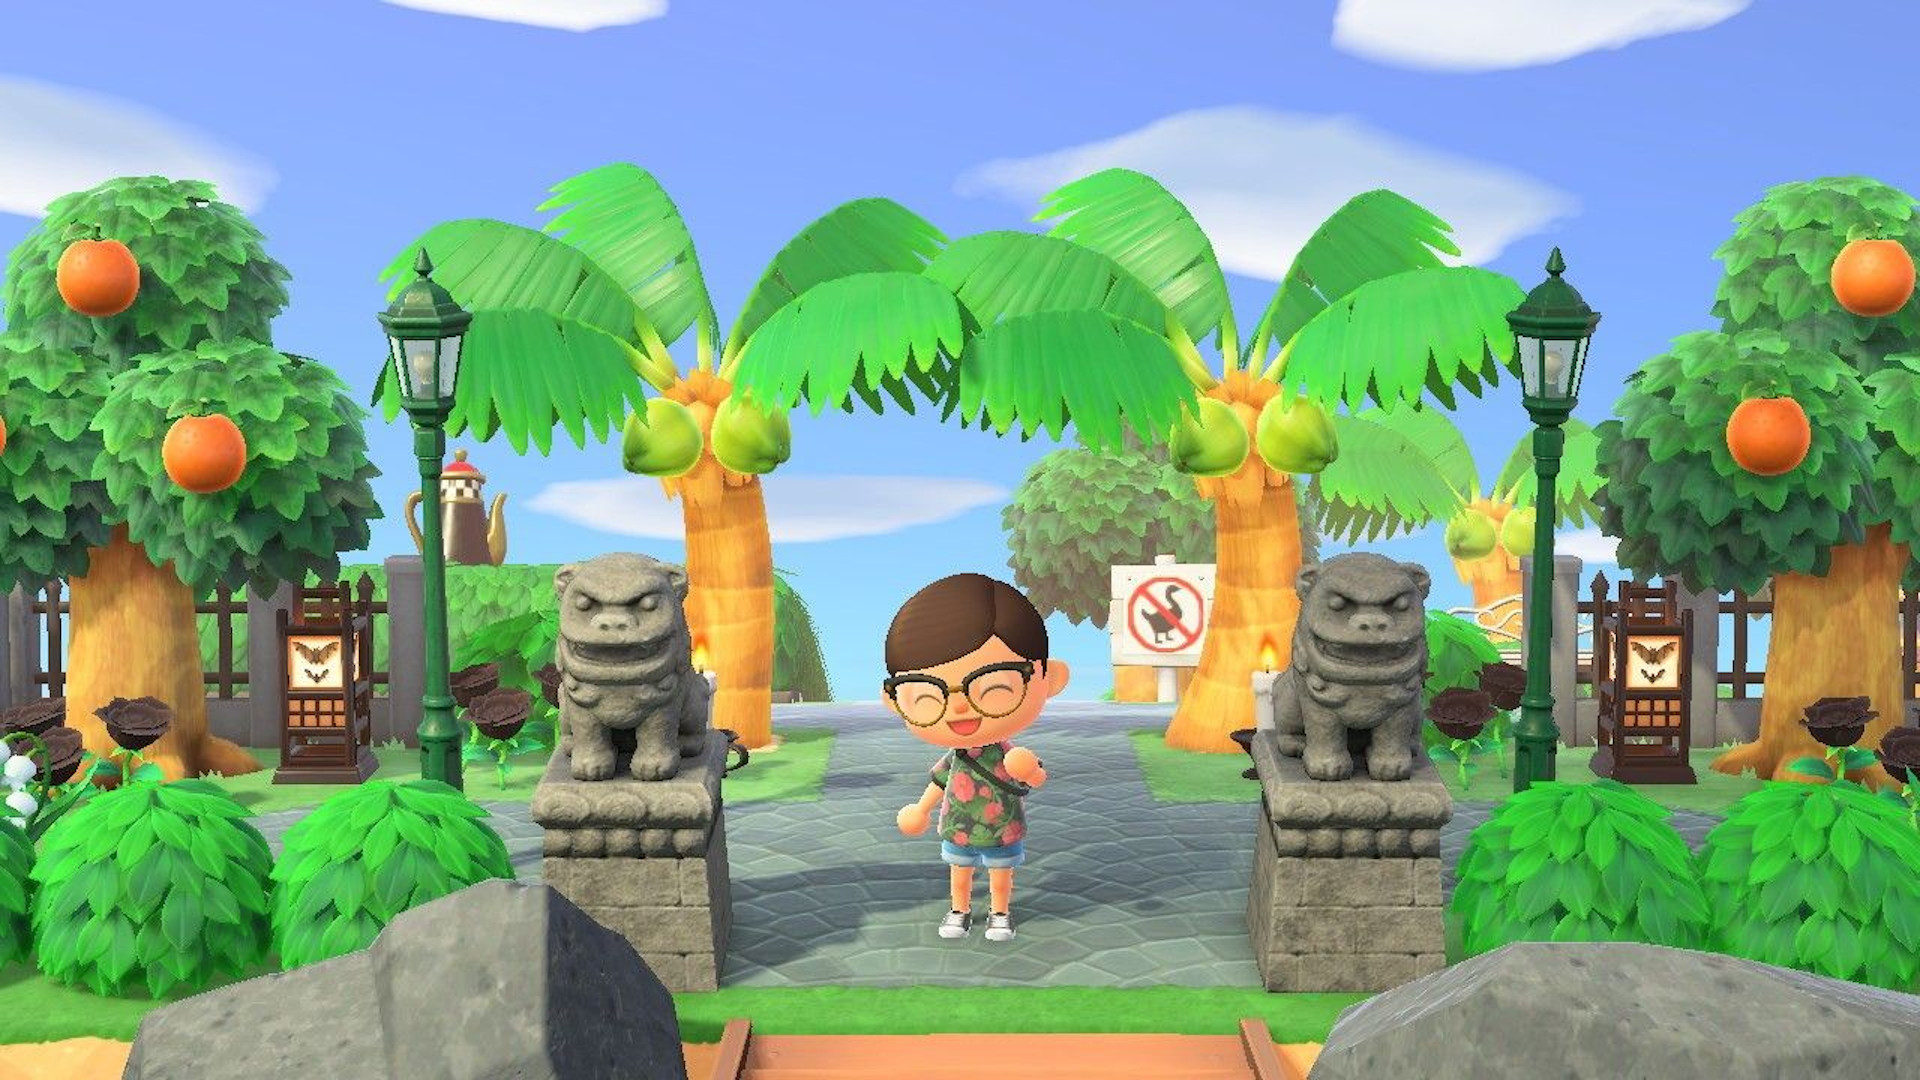 25 Ideas For Your Animal Crossing: New Horizons Island | vlr.eng.br